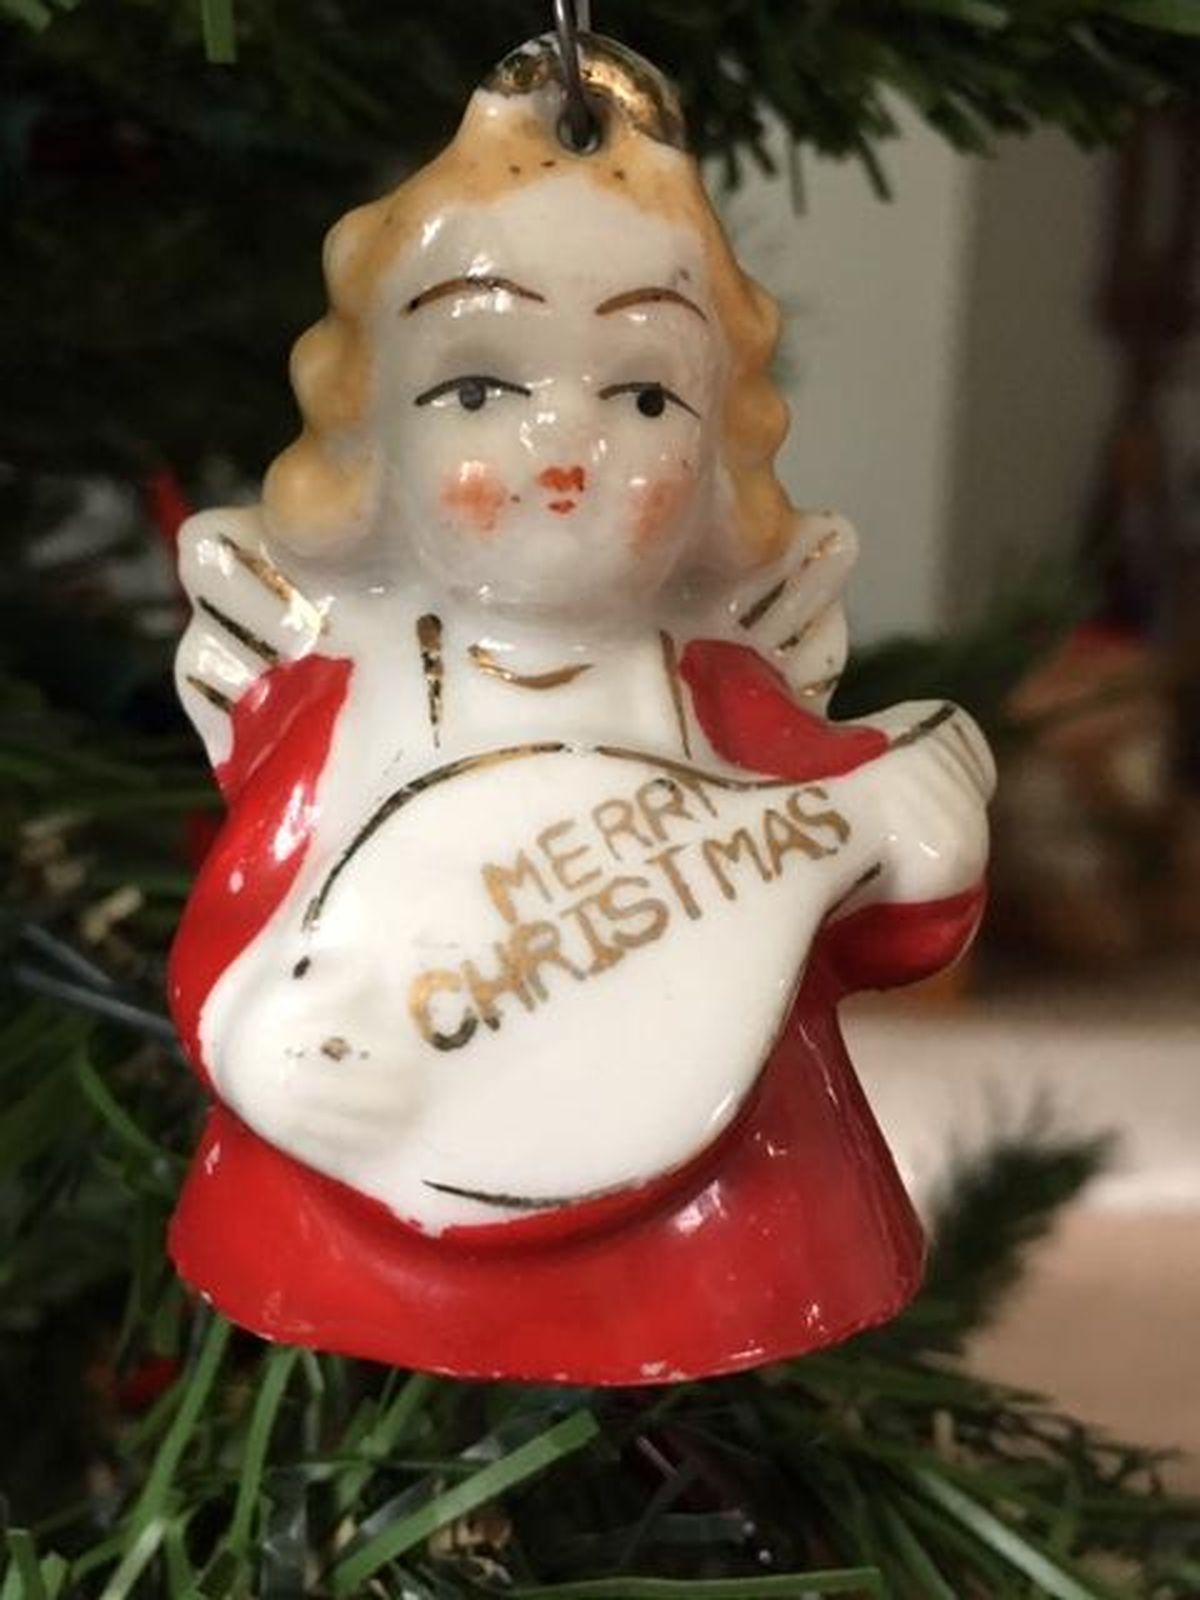 This angel bell ornament was a gift from a childhood friend Melody Noble has since lost track of. But the trinket always has a special spot on her Christmas tree. (Courtesy of Melody Noble)